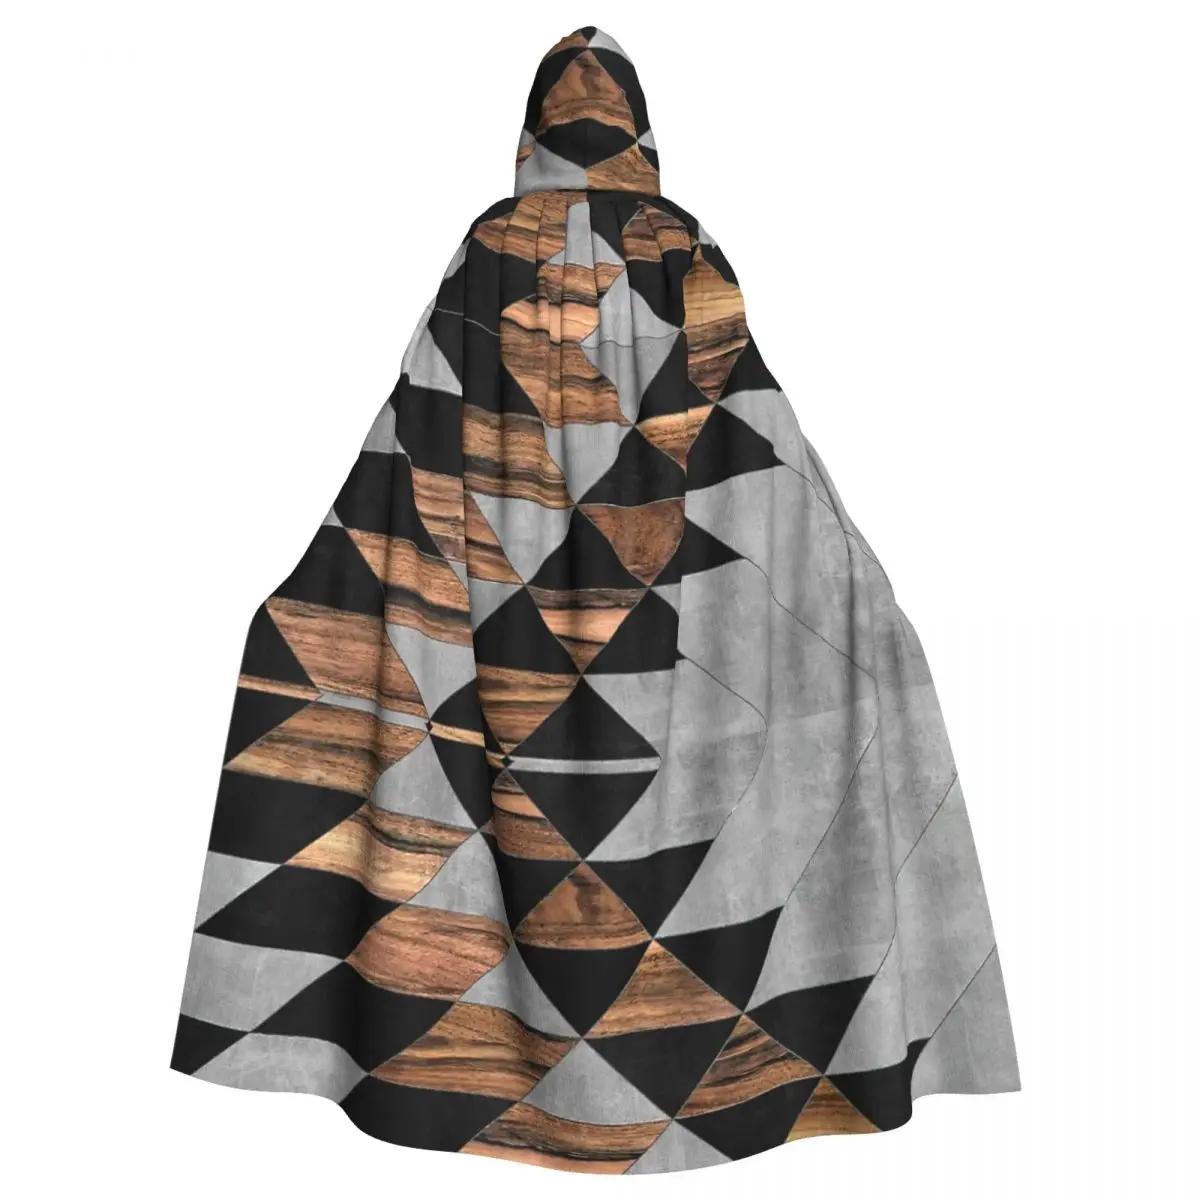 

Urban Tribal Pattern - Aztec - Concrete And Wood Hooded Cloak Halloween Party Cosplay Woman Men Adult Long Witchcraft Robe Hood